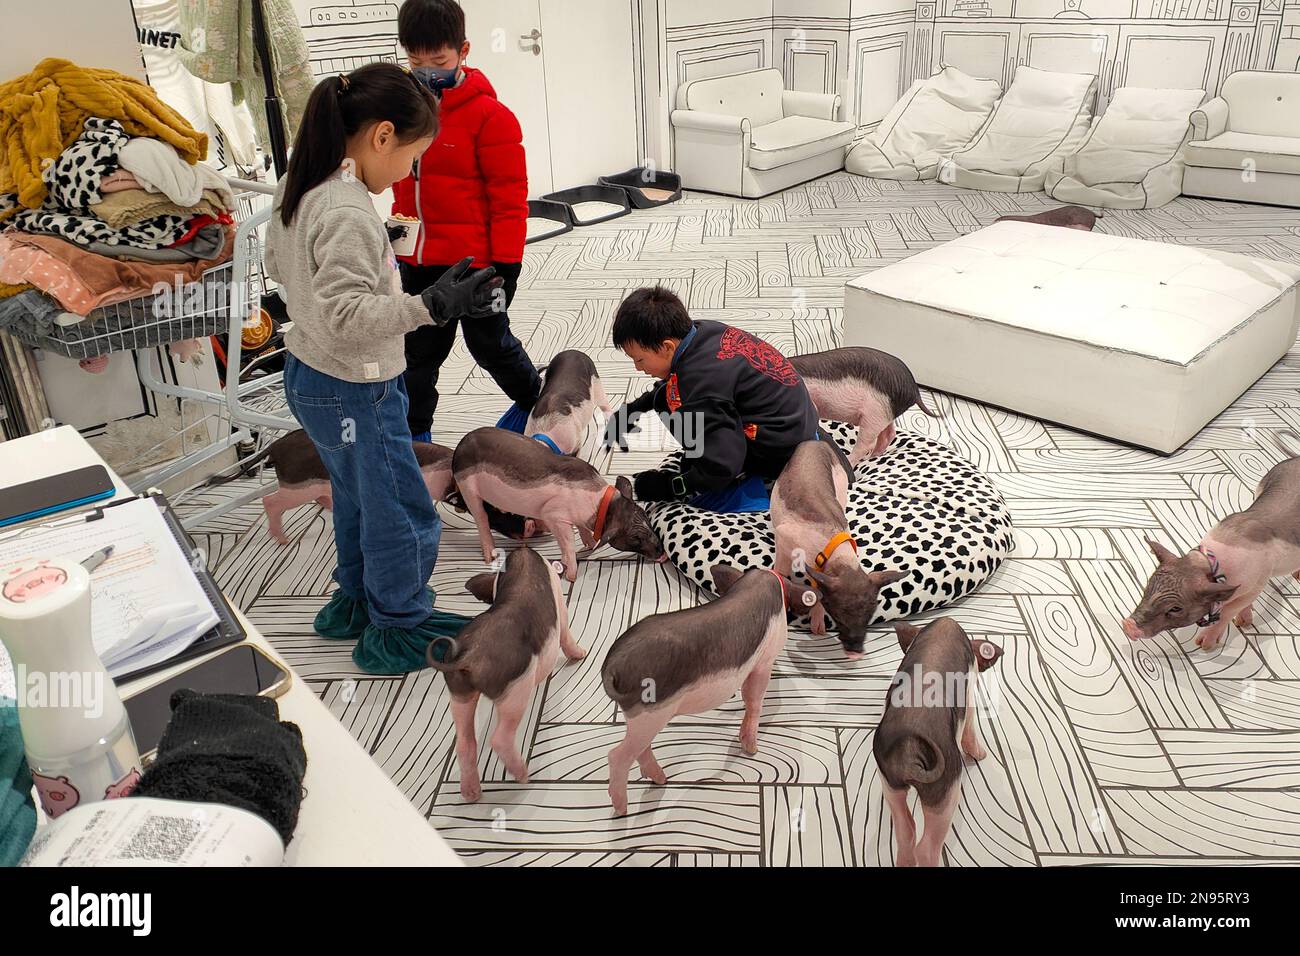 SHANGHAI, CHINA - FEBRUARY 11, 2023 - Children play with a dozen baby pigs at a pet store in Shanghai, China, February 11, 2023. Stock Photo